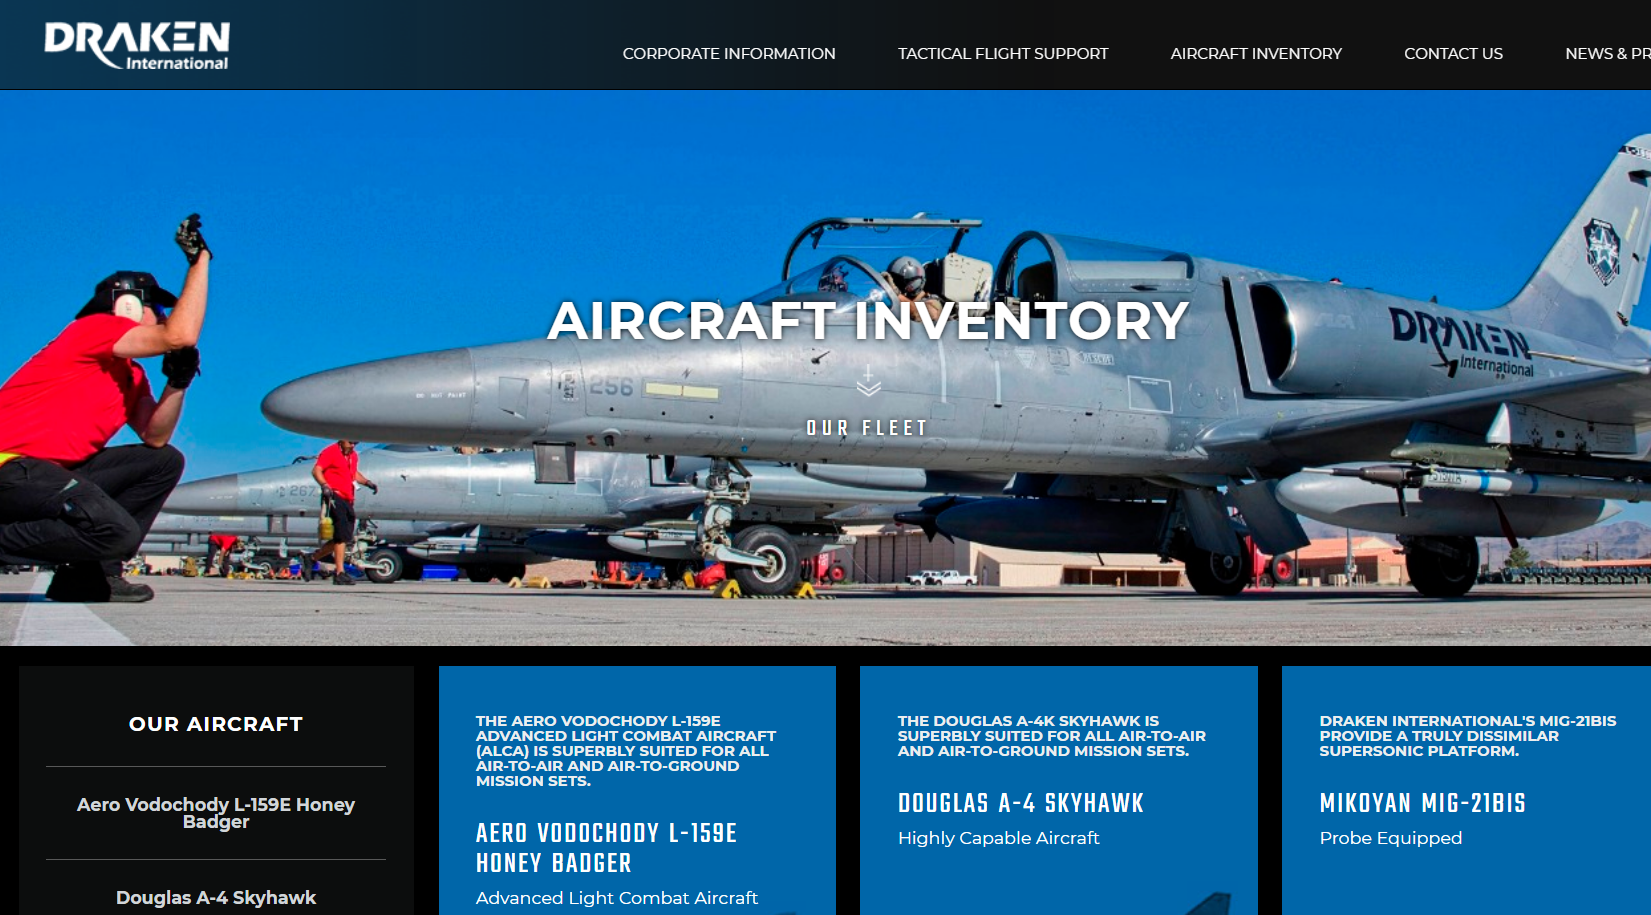 Image: EXCLUSIVE: Private company offering “contract air support” using military jet fighters located in Lakeland, FL where live air-to-air missile was just found